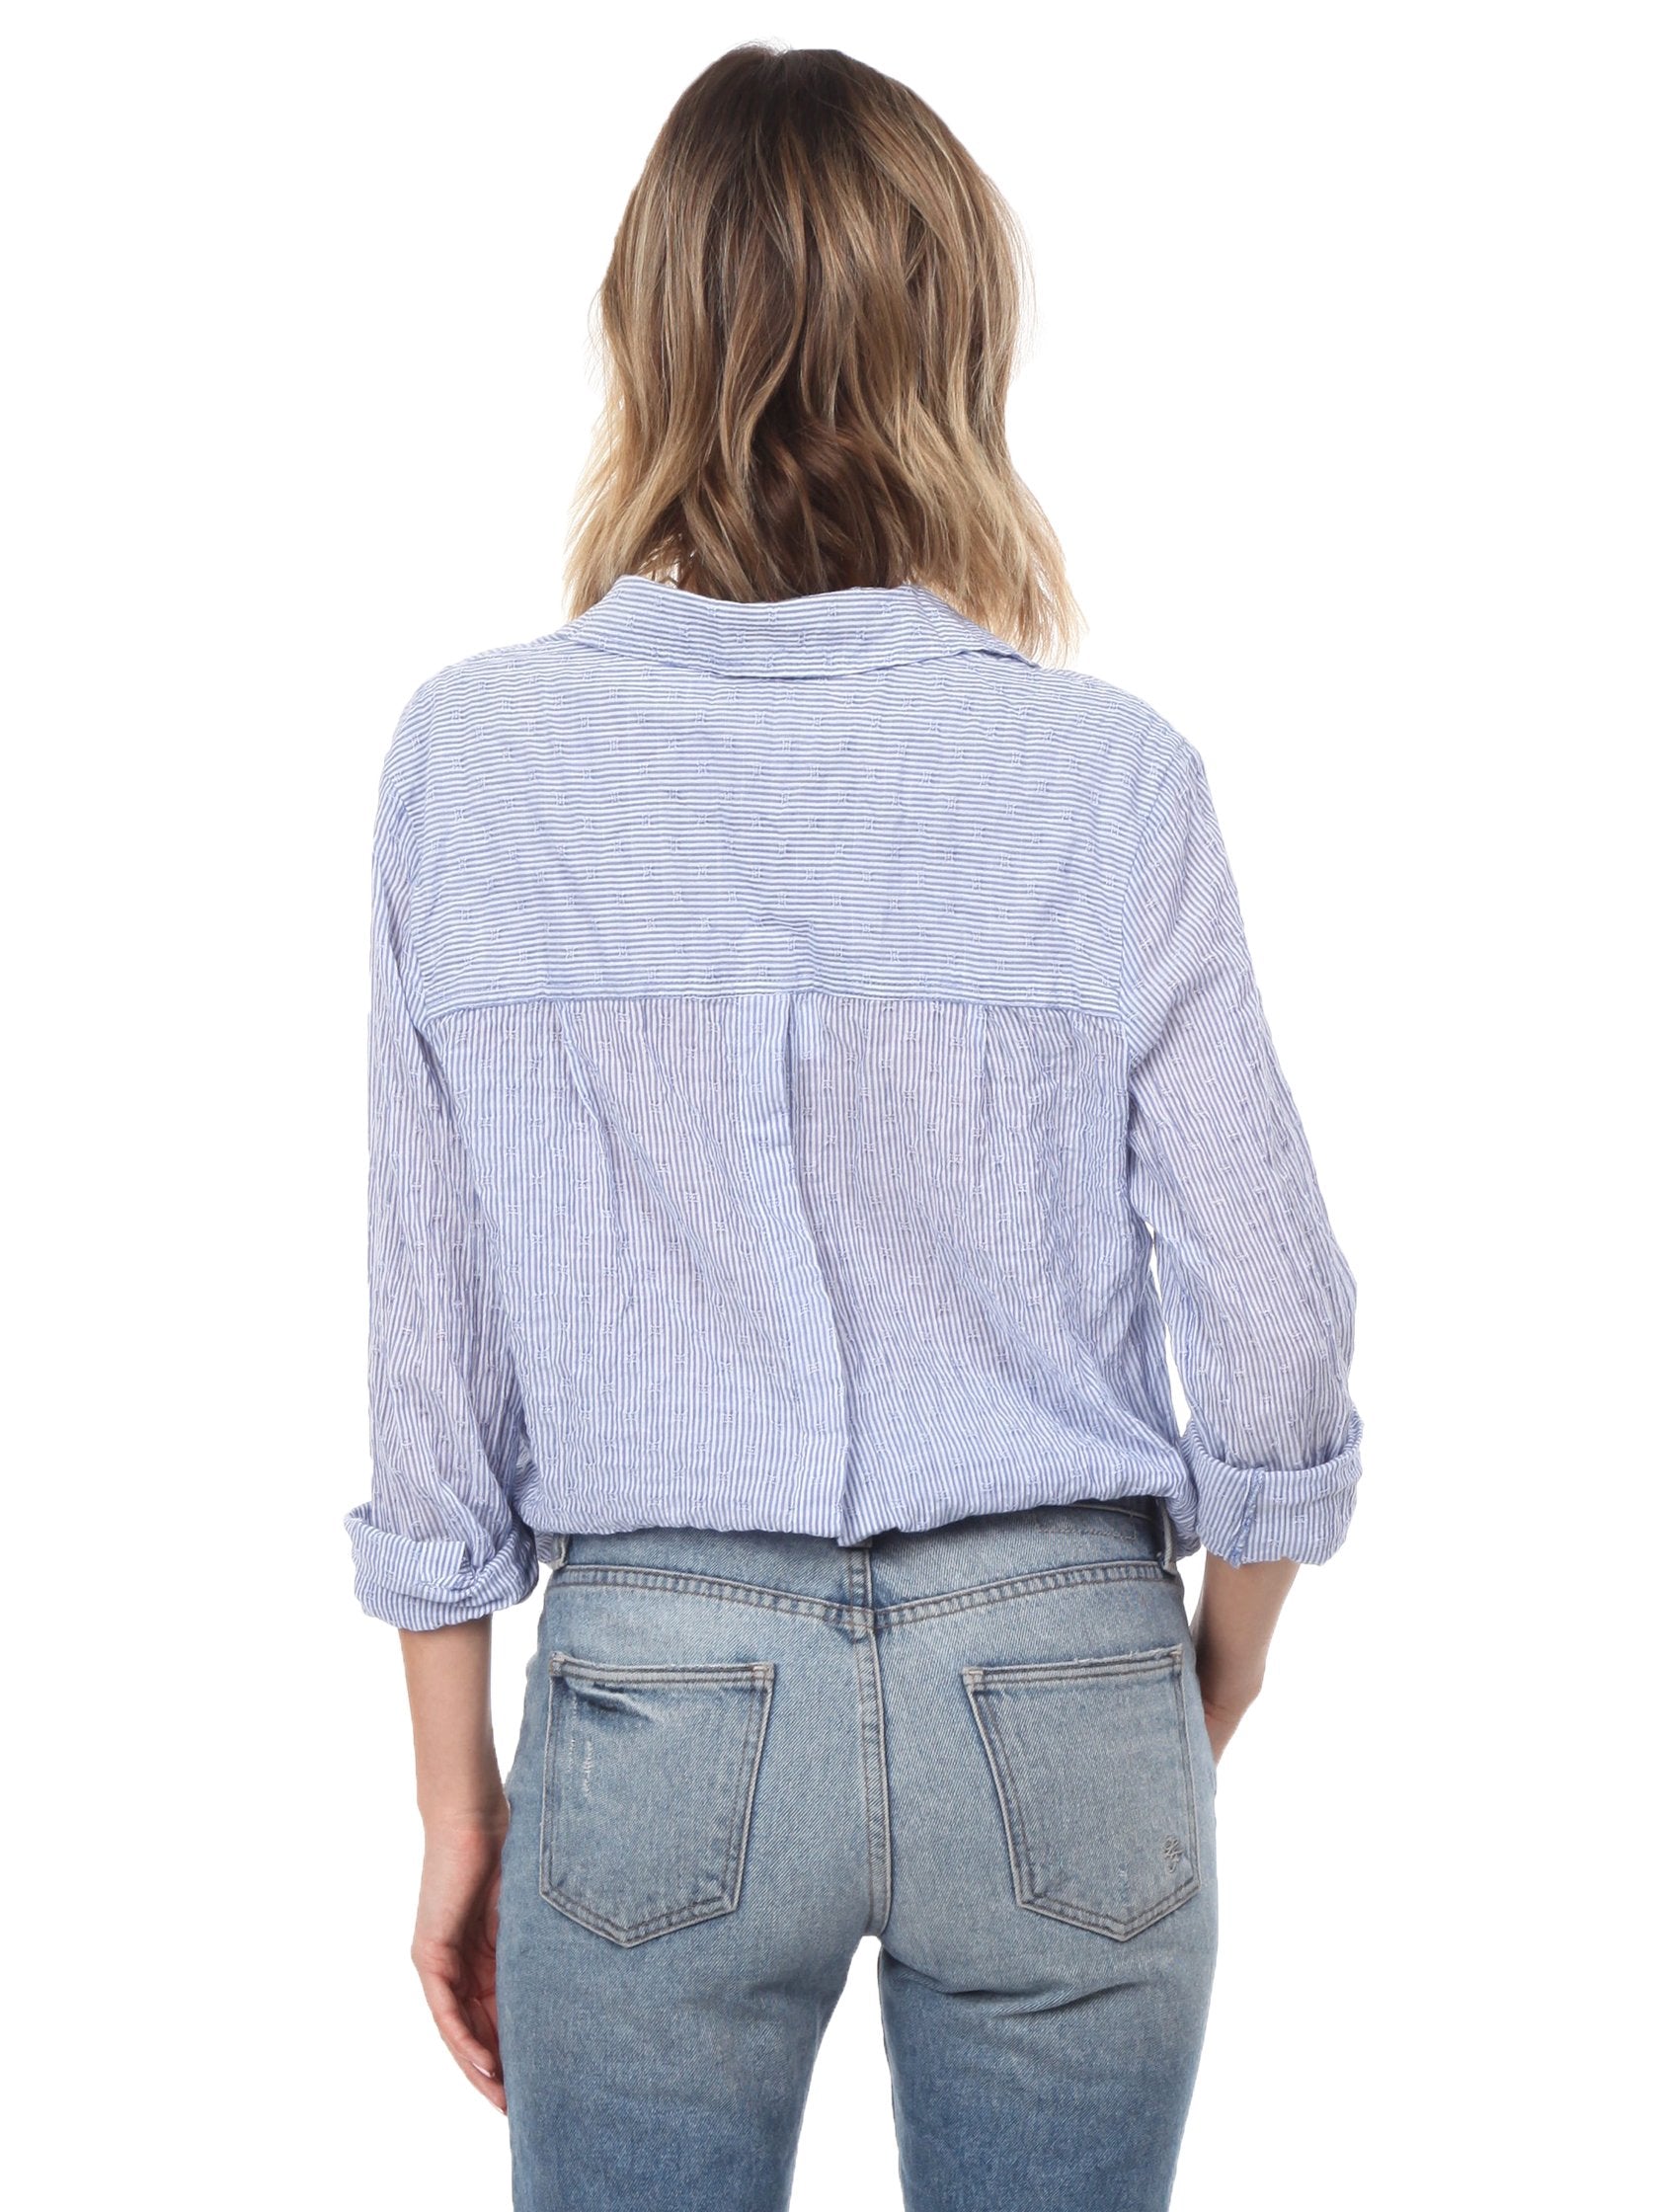 Girl outfit in a top rental from Free People called No Limits Stripe Stretch Cotton Shirt